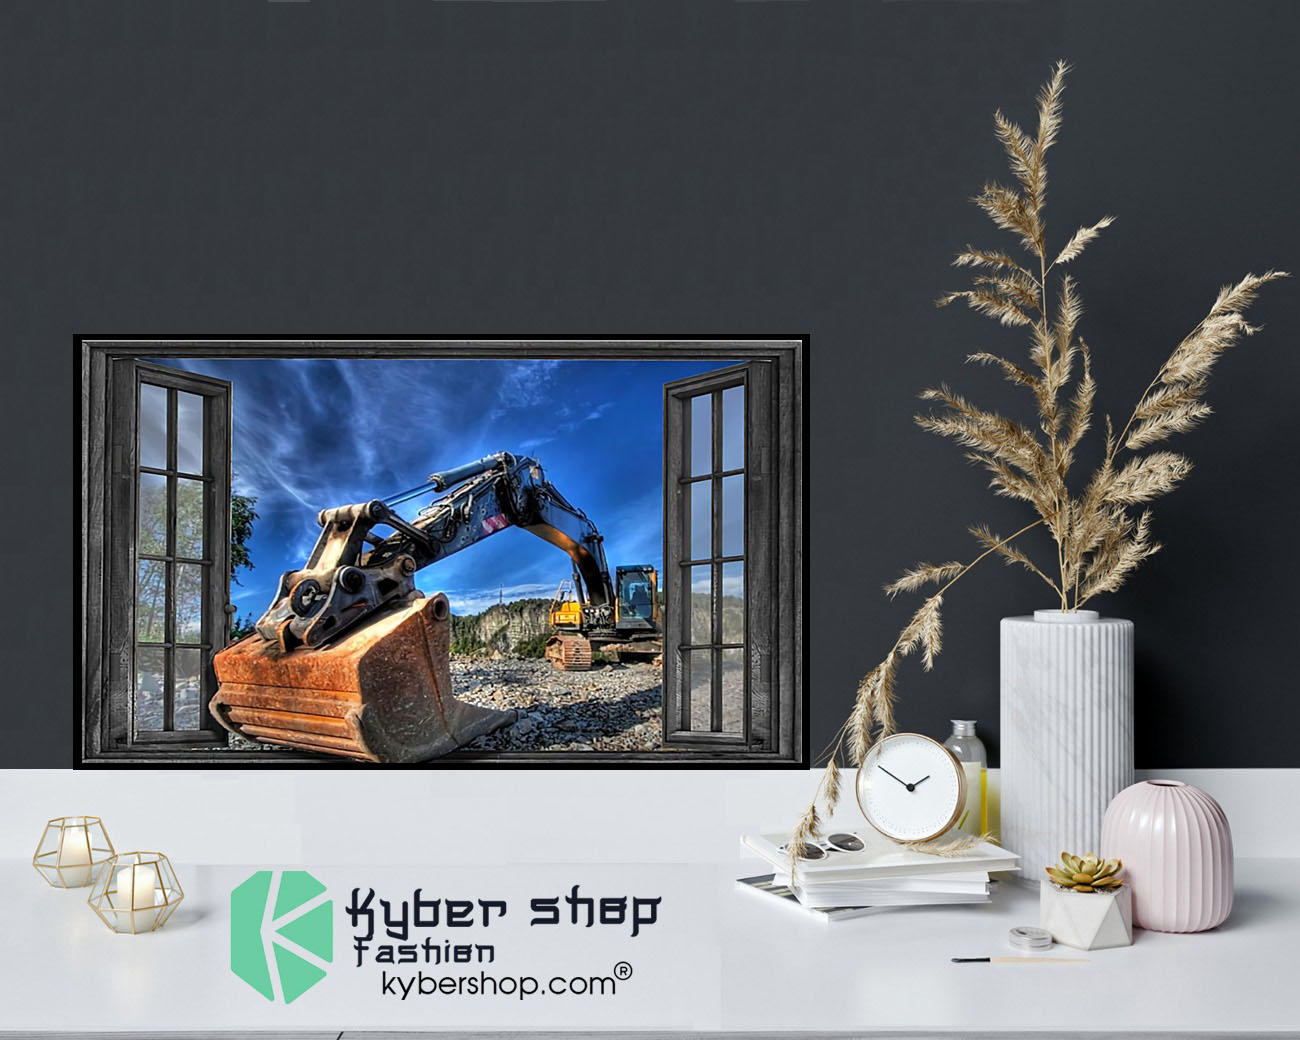 Excavator poster by the window9